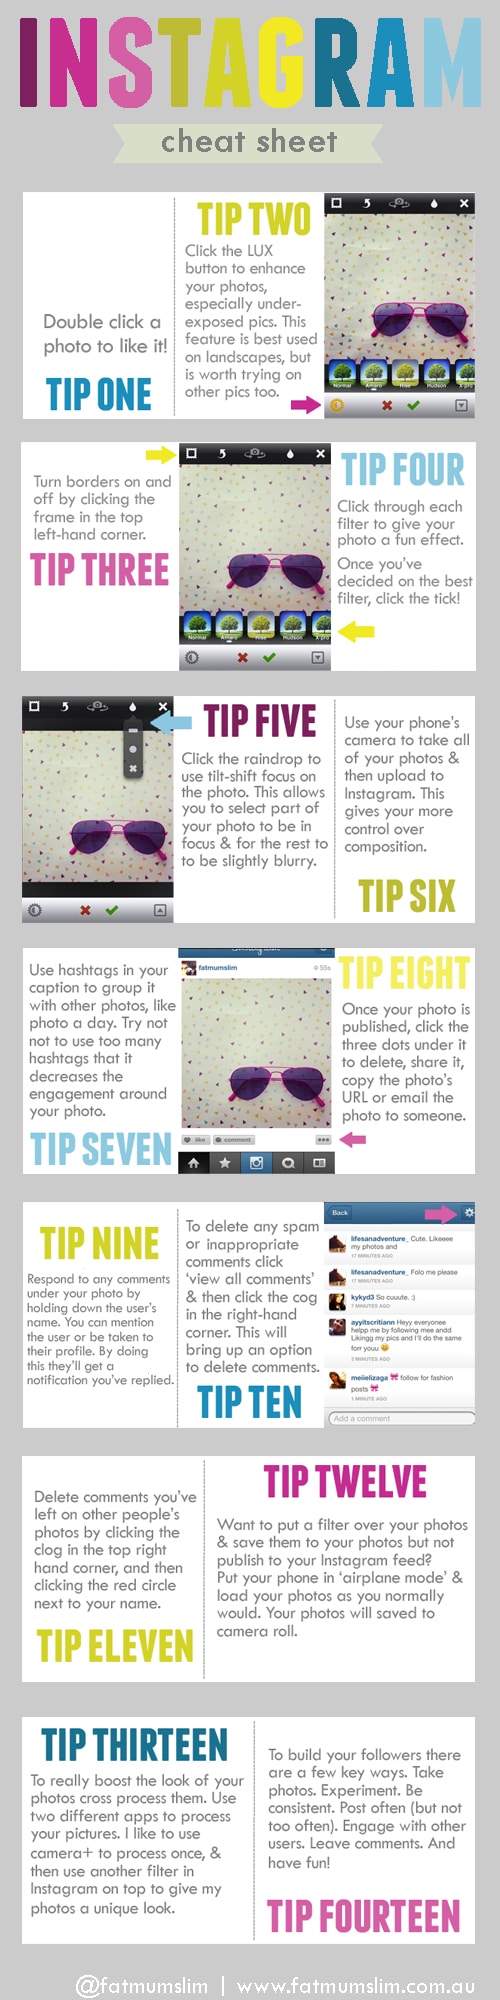 Instagram Cheat Sheet: 14 Tips To Master It All